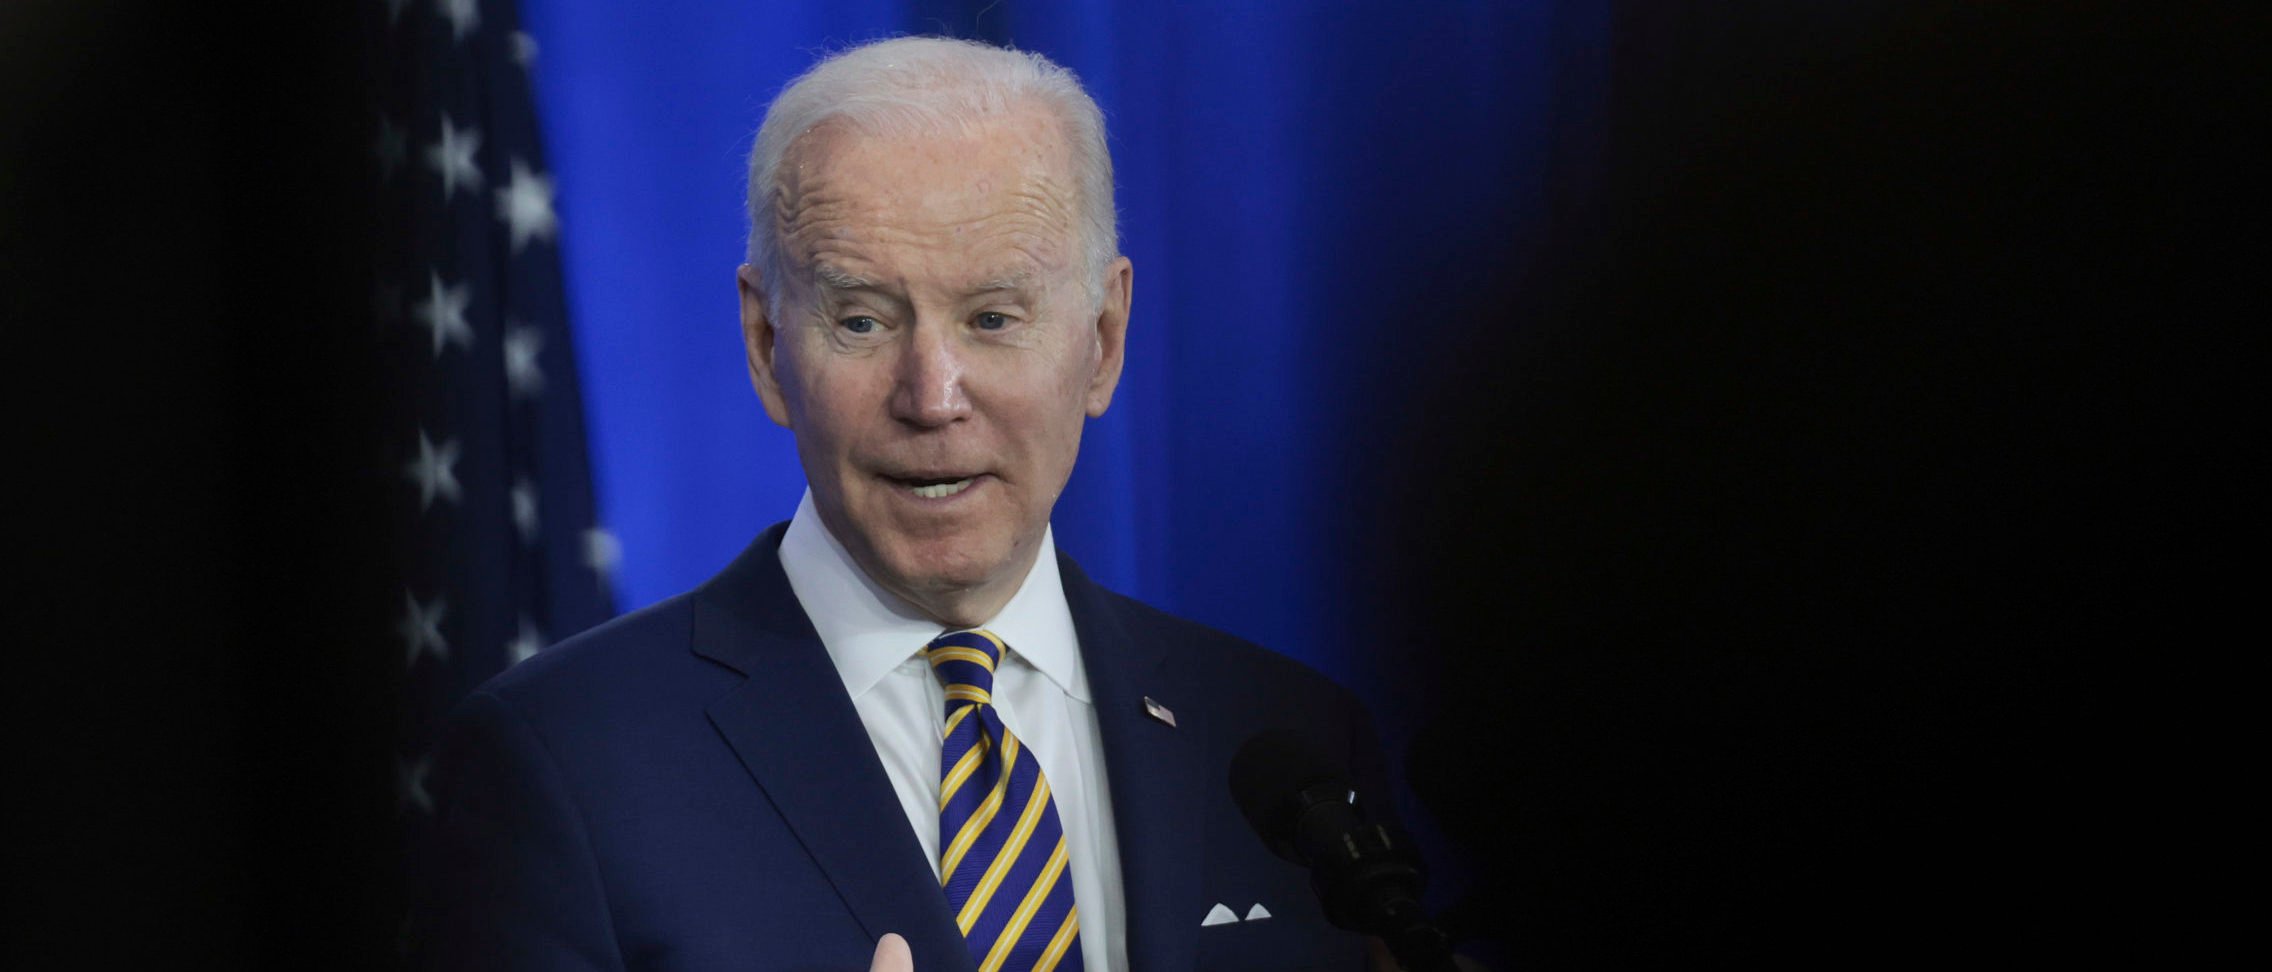 Pro-Immigration Biden State Department Fights Court Orders To Avoid Giving Some Visas That Mostly Help African Migrants